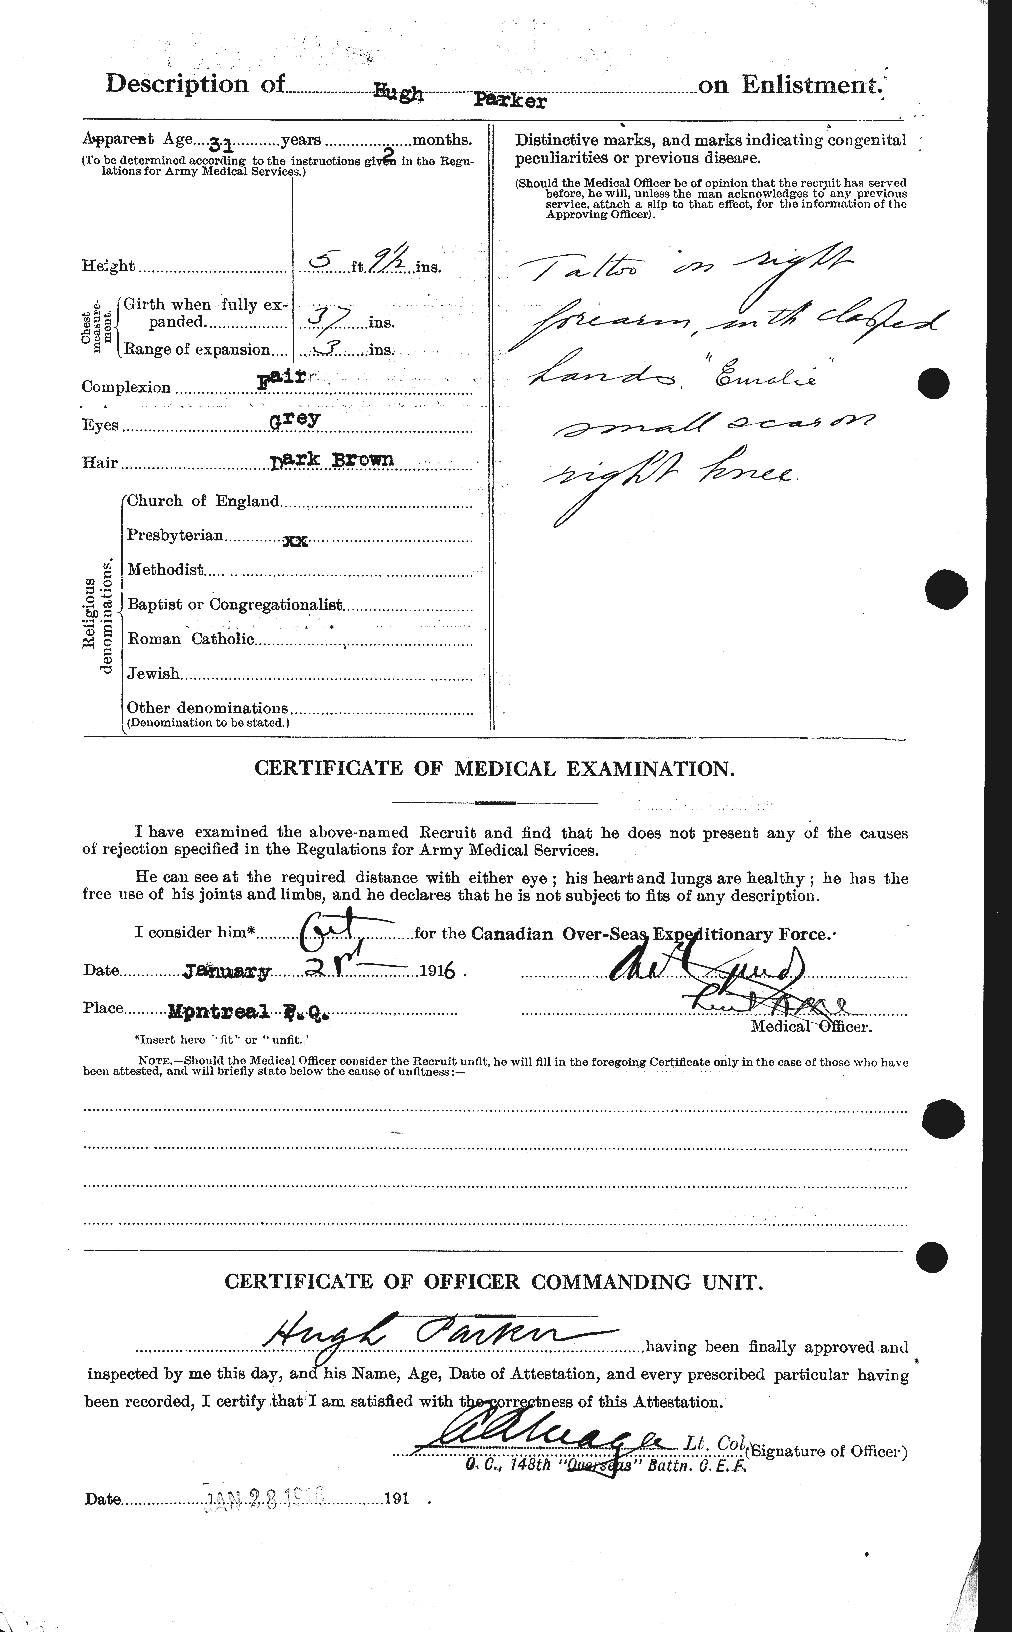 Personnel Records of the First World War - CEF 565392b